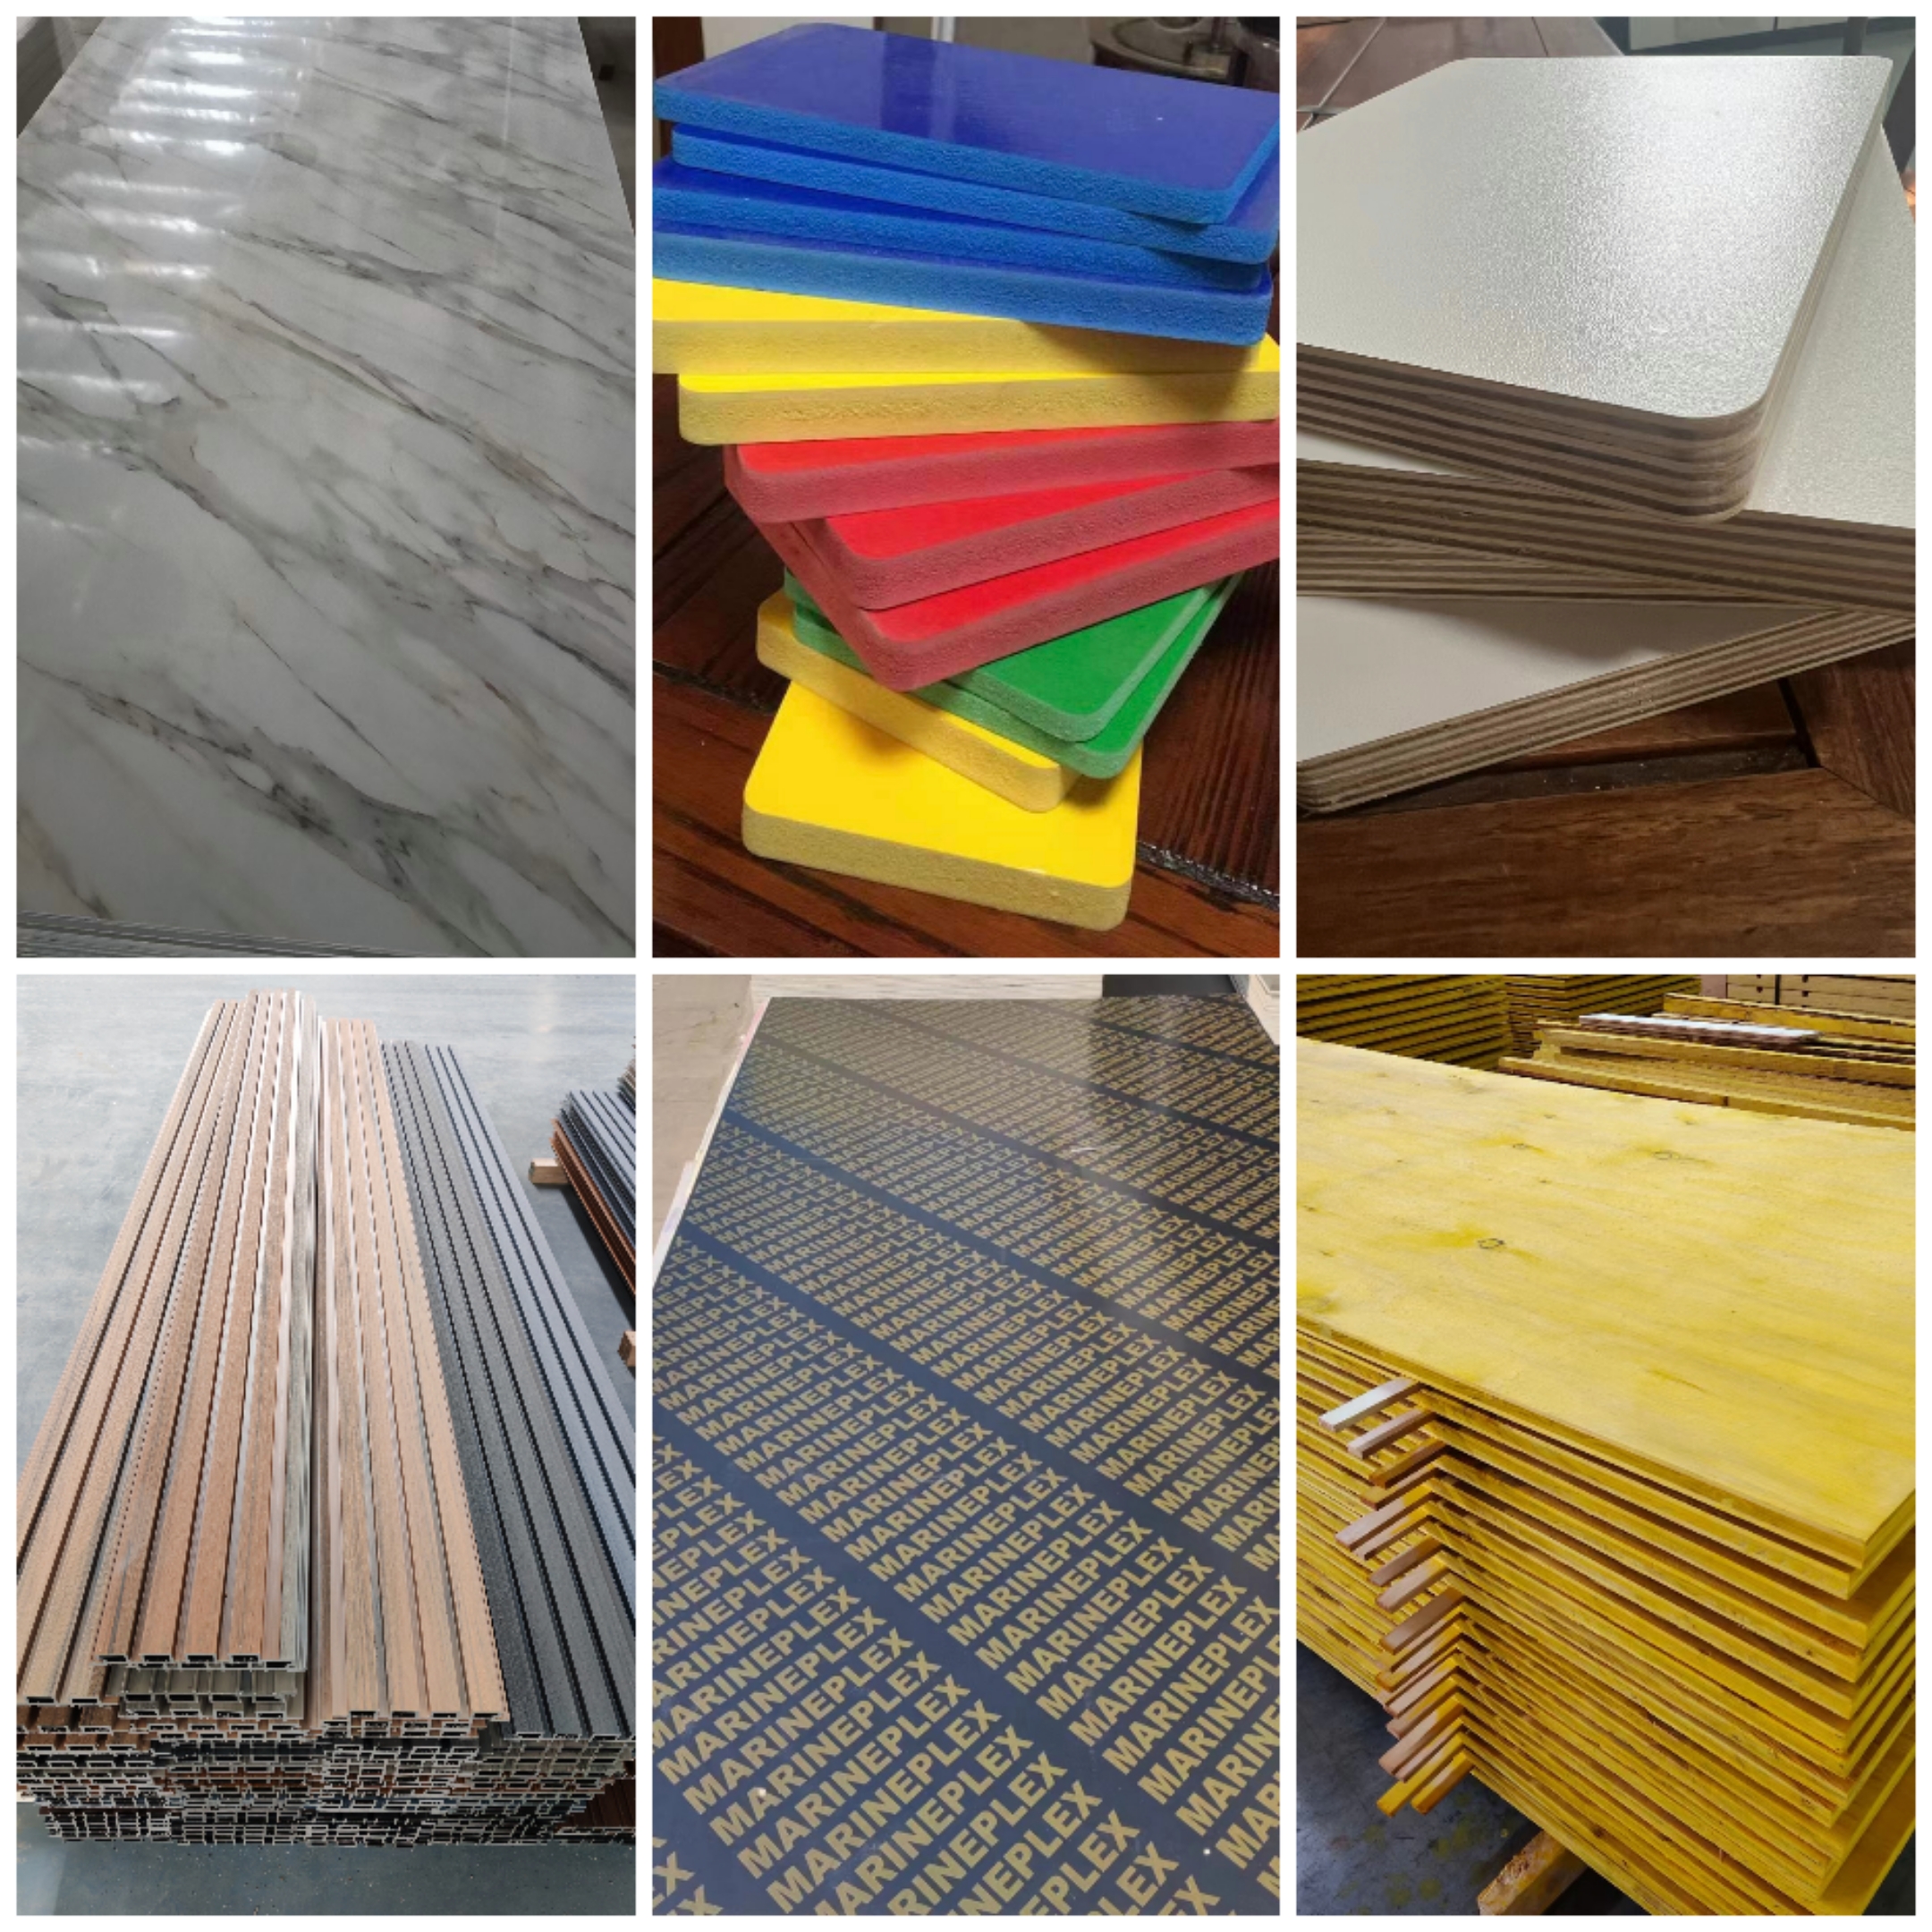 A Company Specialize In Export Wooden Board And Furniture